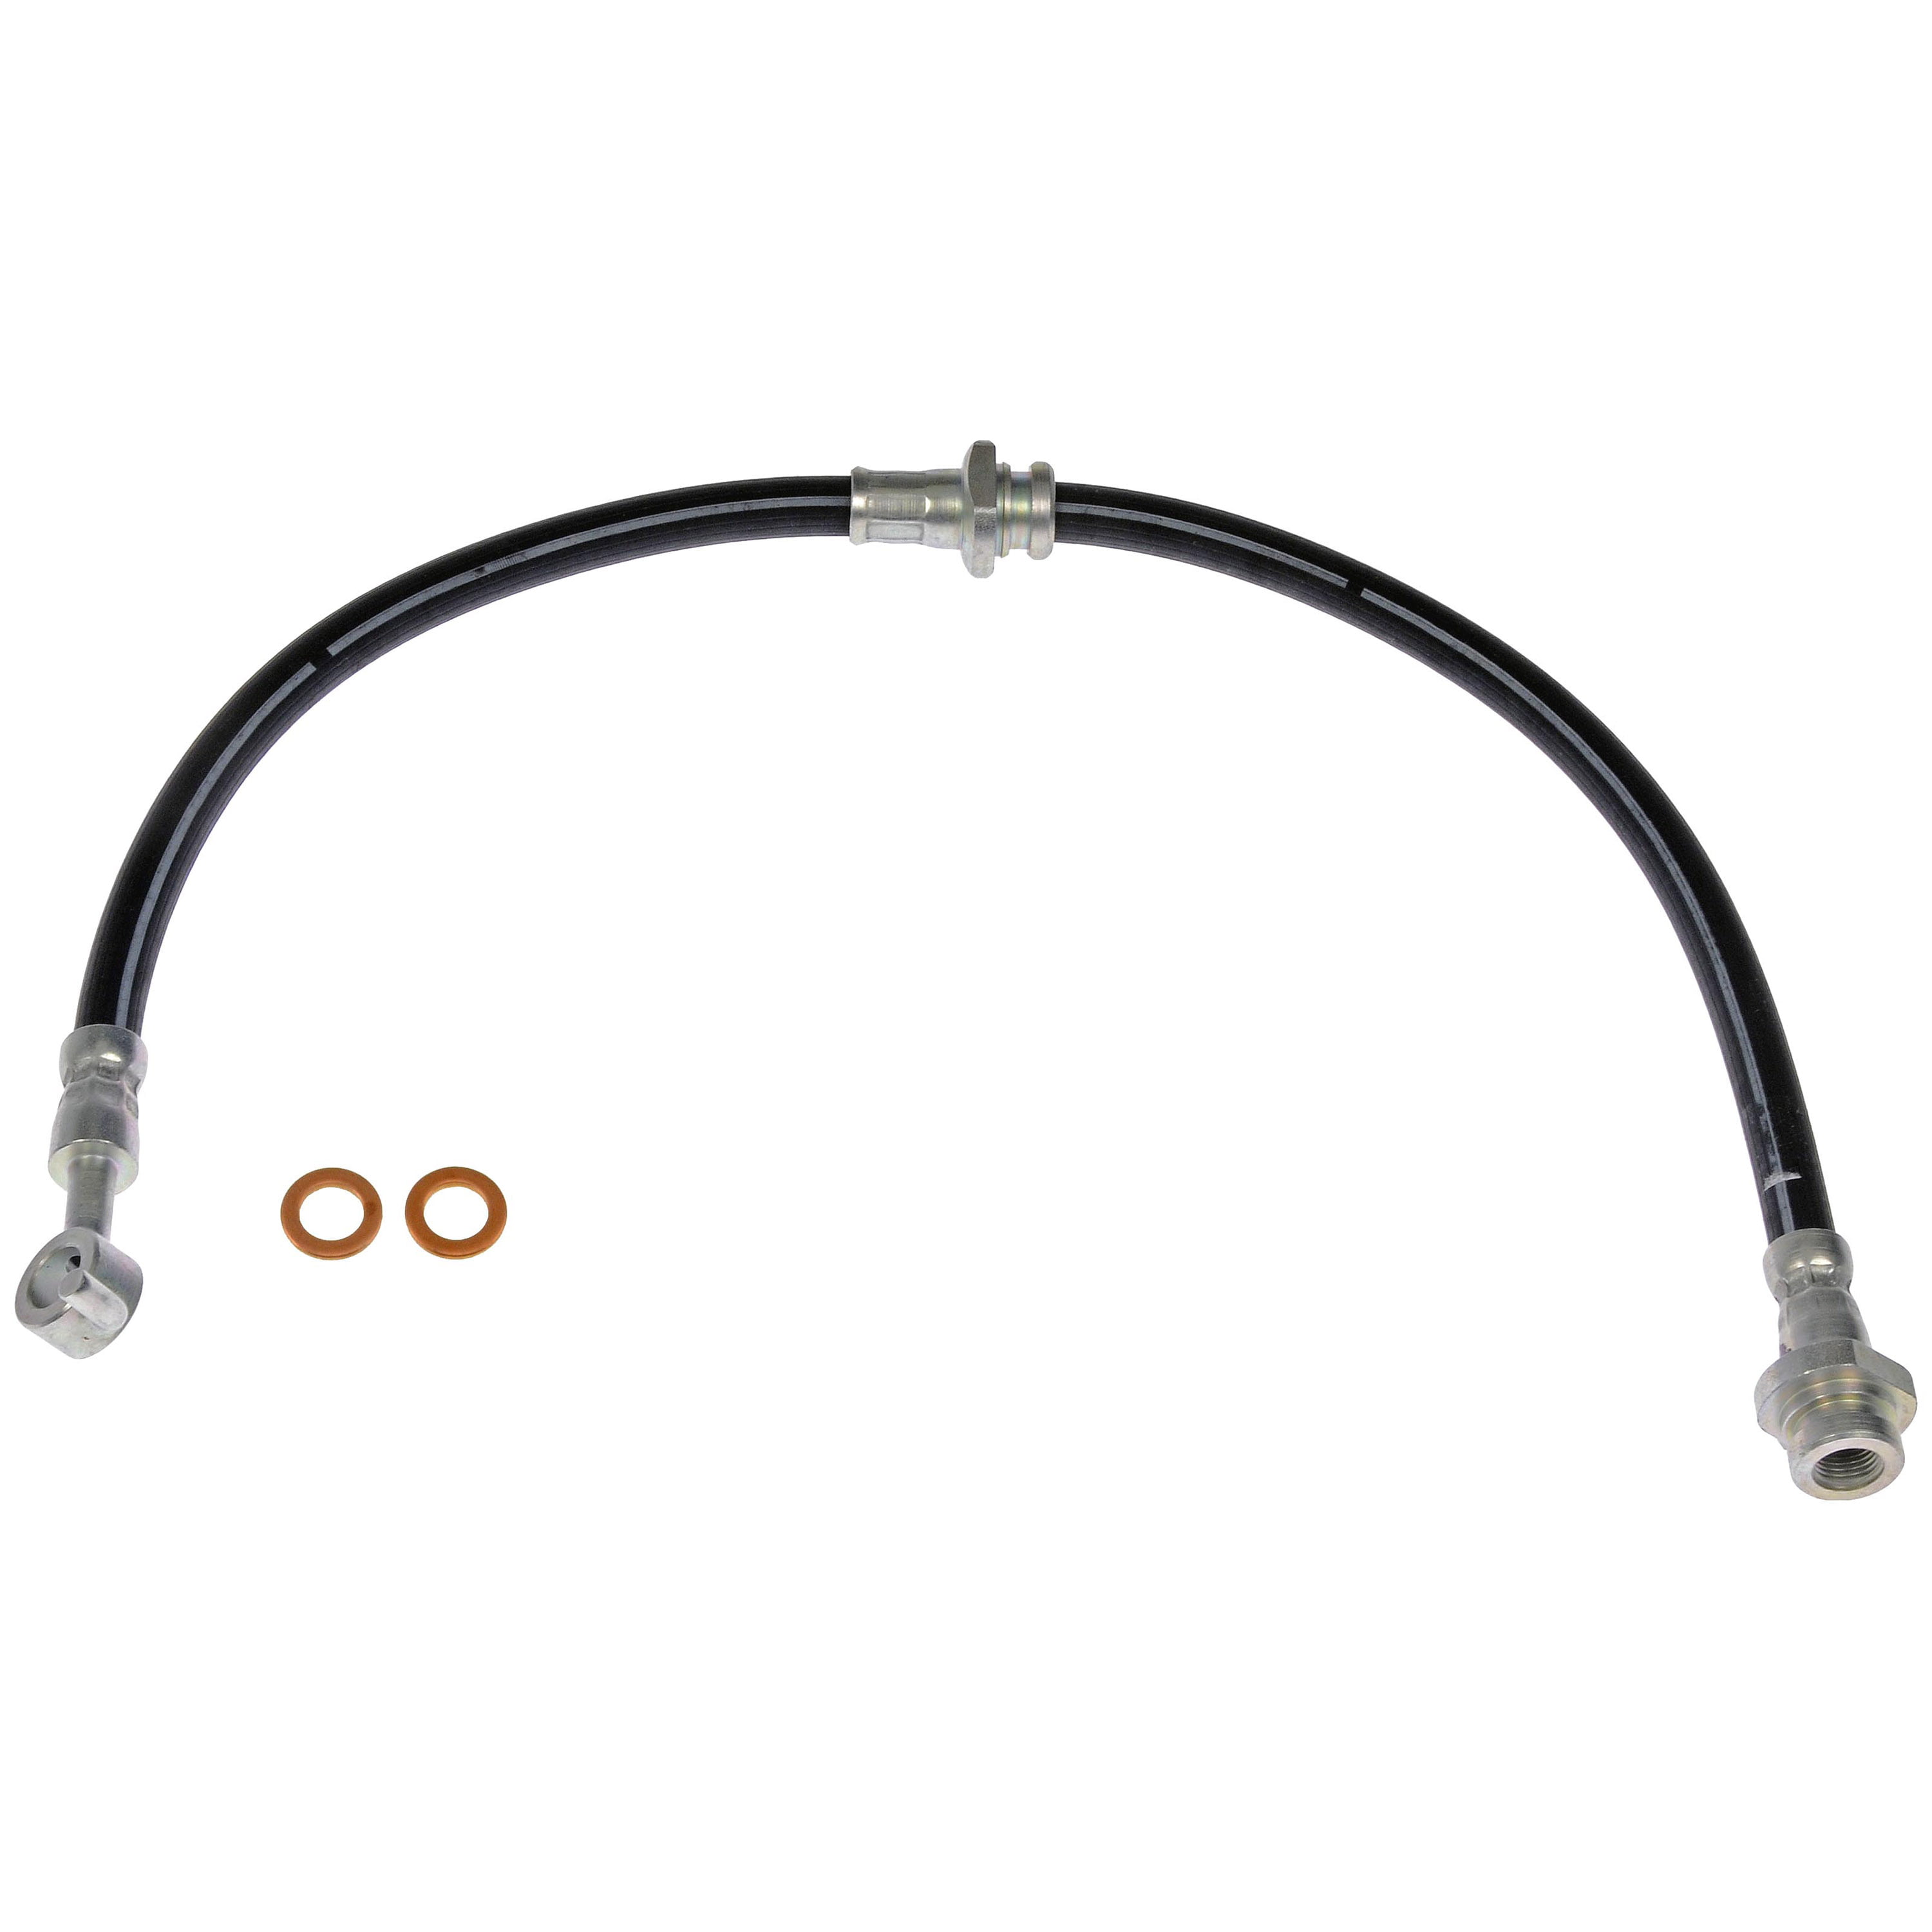 For Chevy Silverado 1500/2500 Parking Brake Cable 1999-2006 Driver Side Bed Length 78 in Rear Disc Brakes 15189791 w/ 2 Wheel Steering 